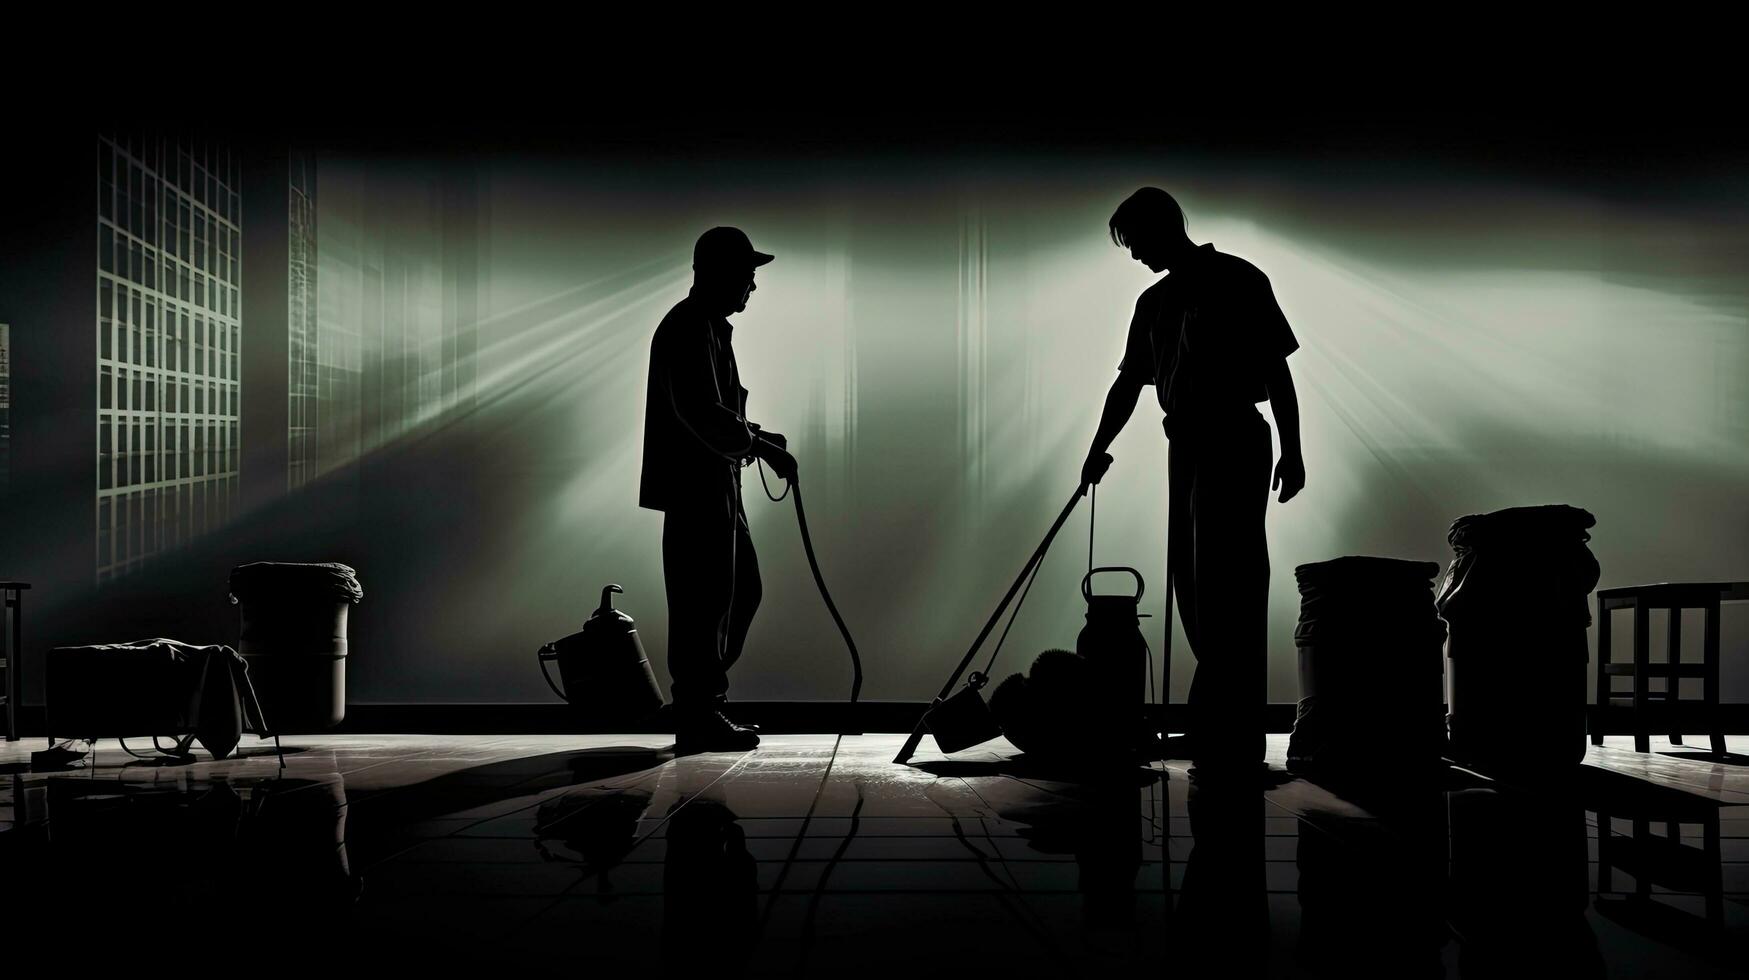 Artistic image of male janitor on duty cleaning photo